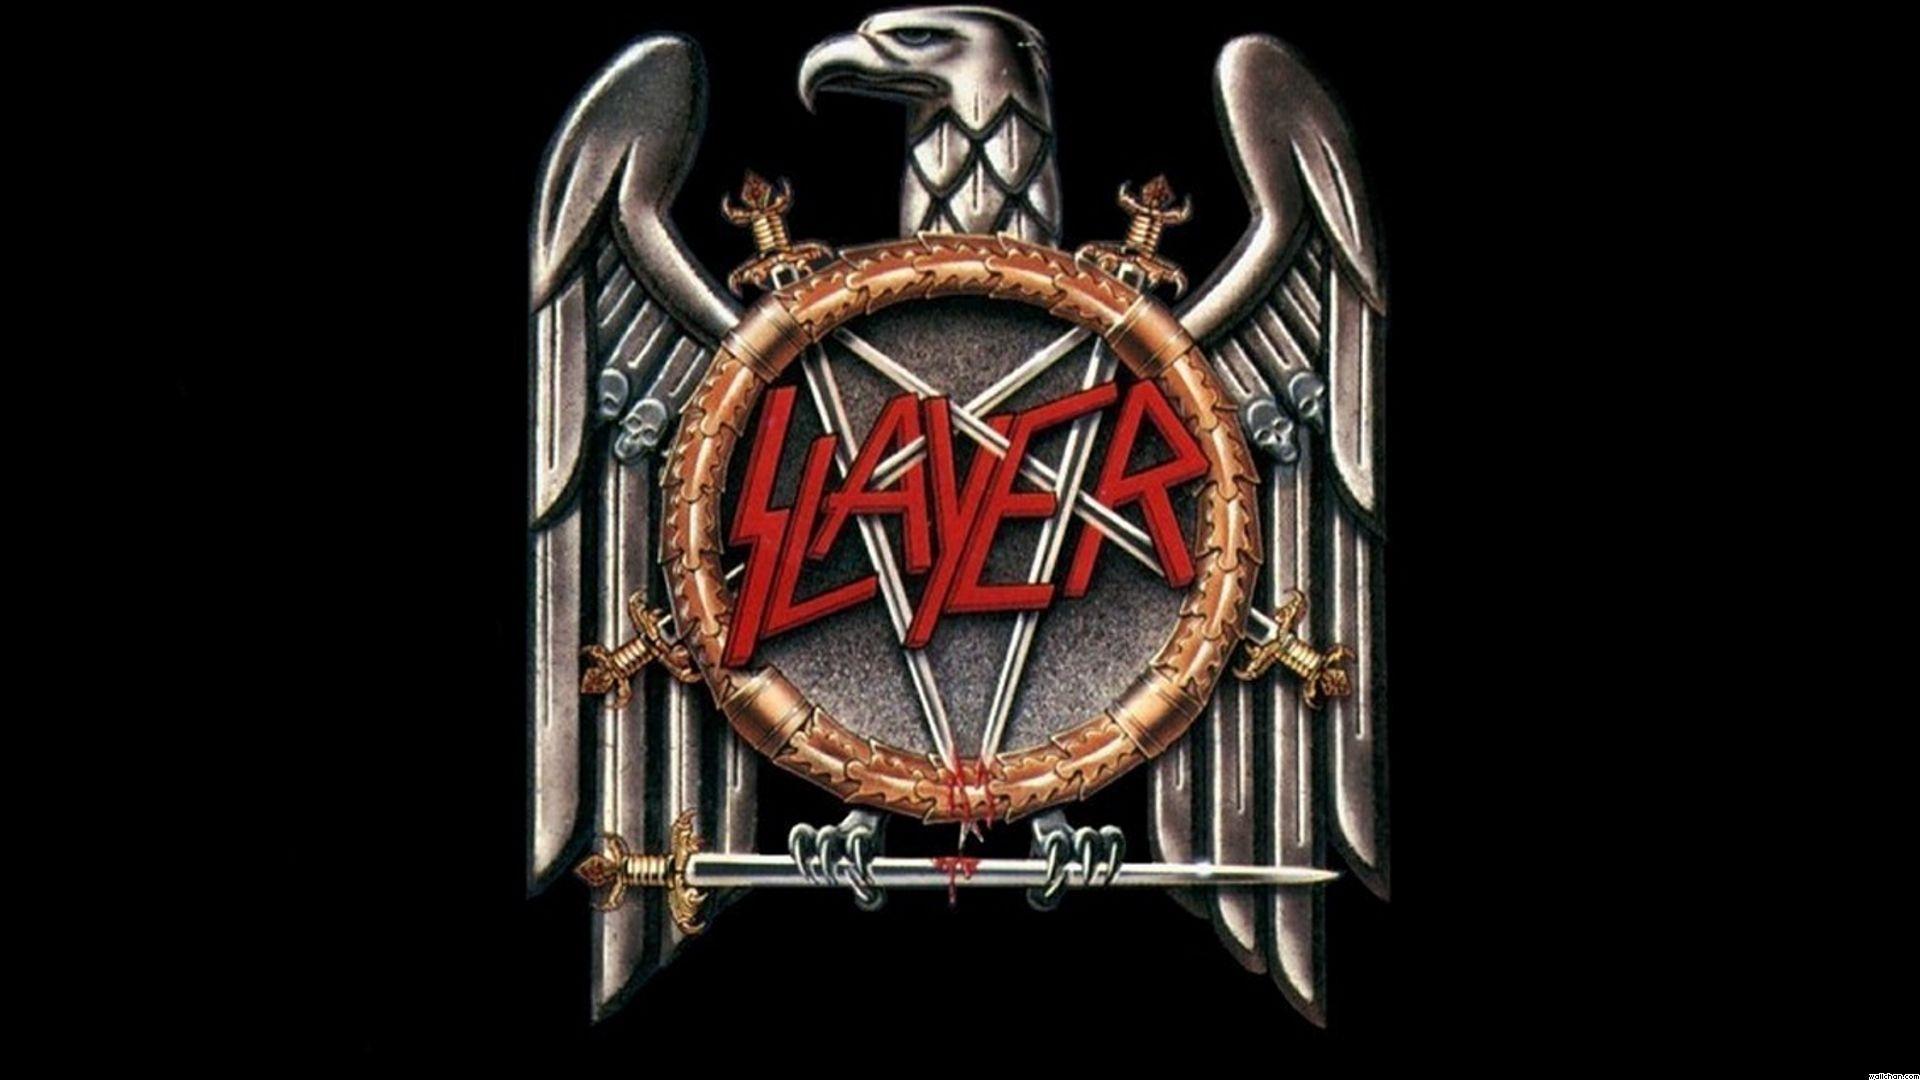 Slayer groups bands music heavy metal death hard rock album covers